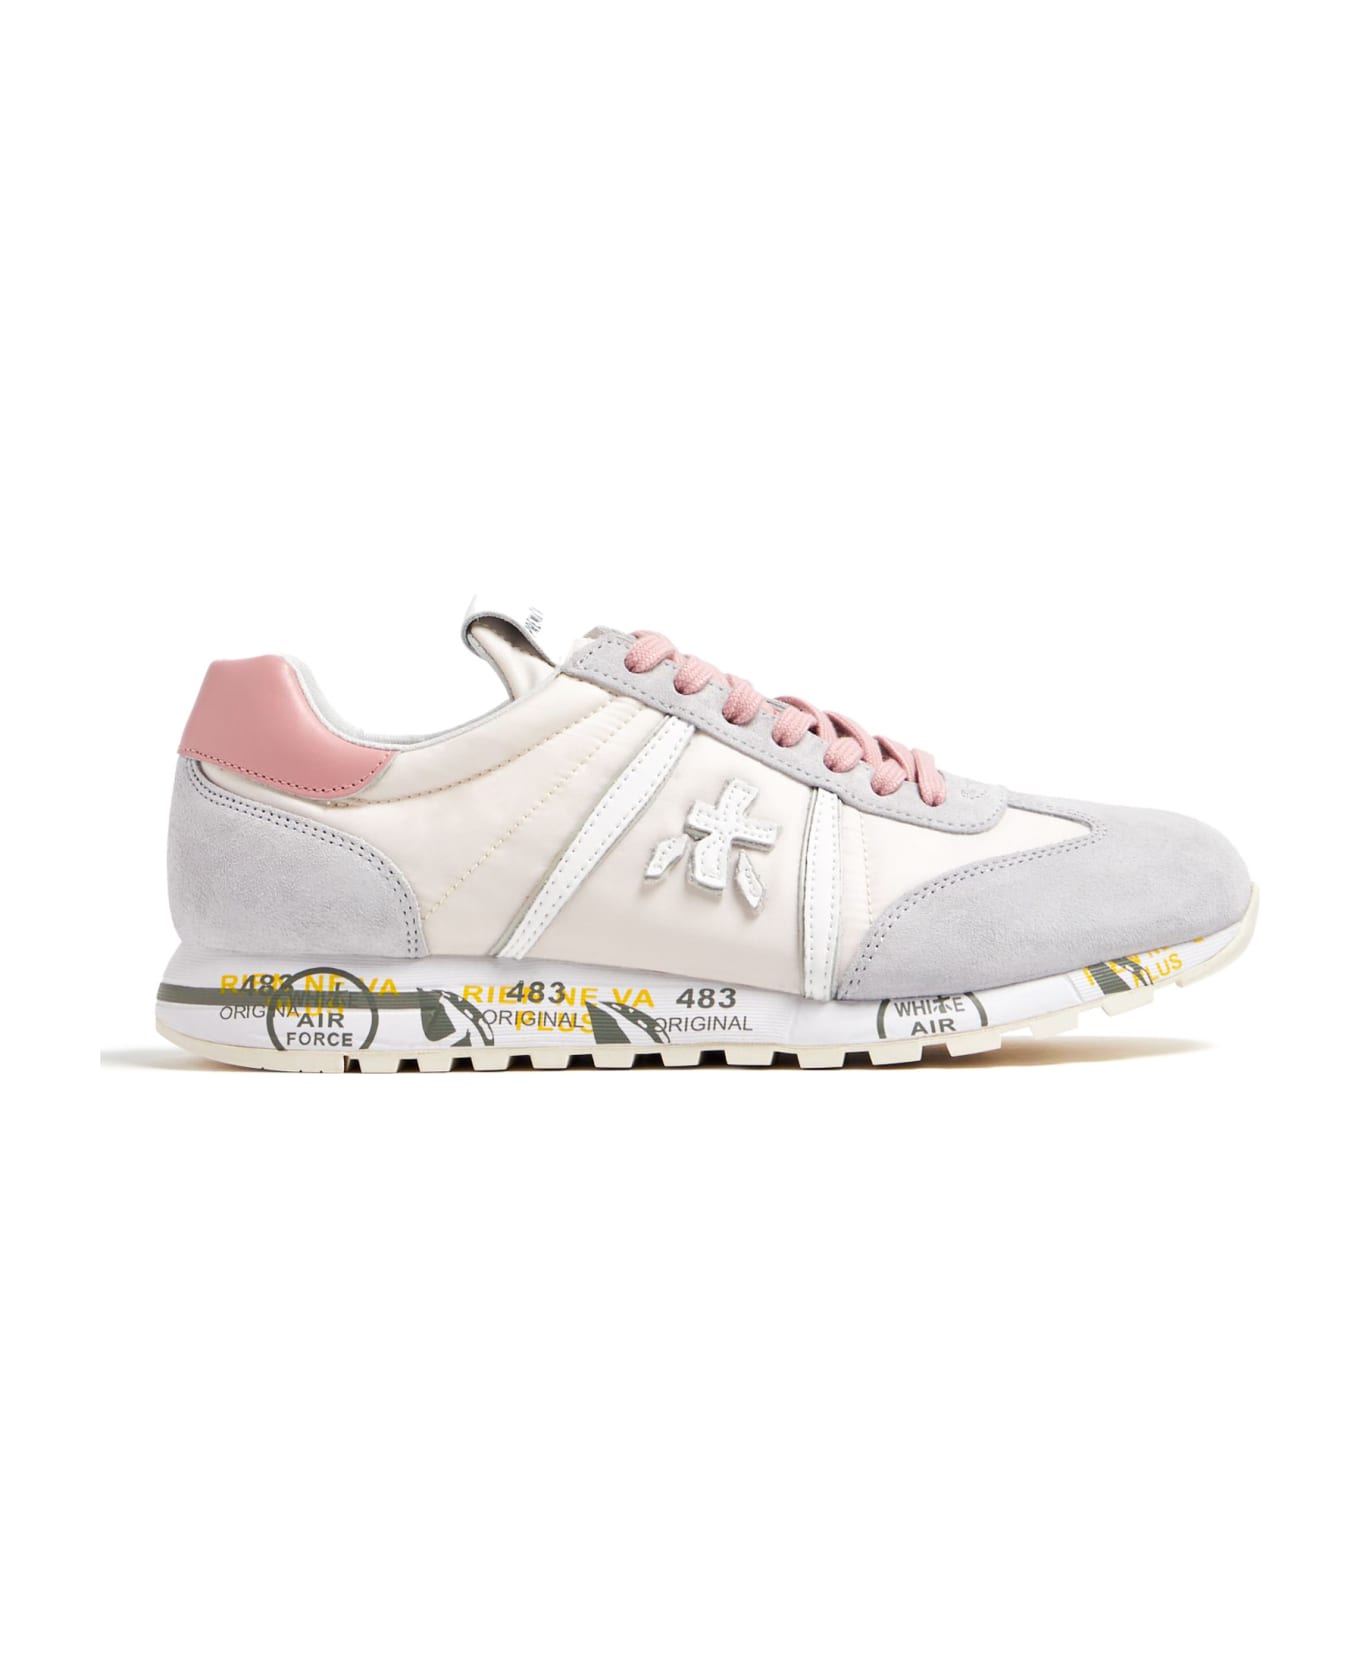 Premiata Grey Suede And Beige Nylon Lucy Sneakers - Grey